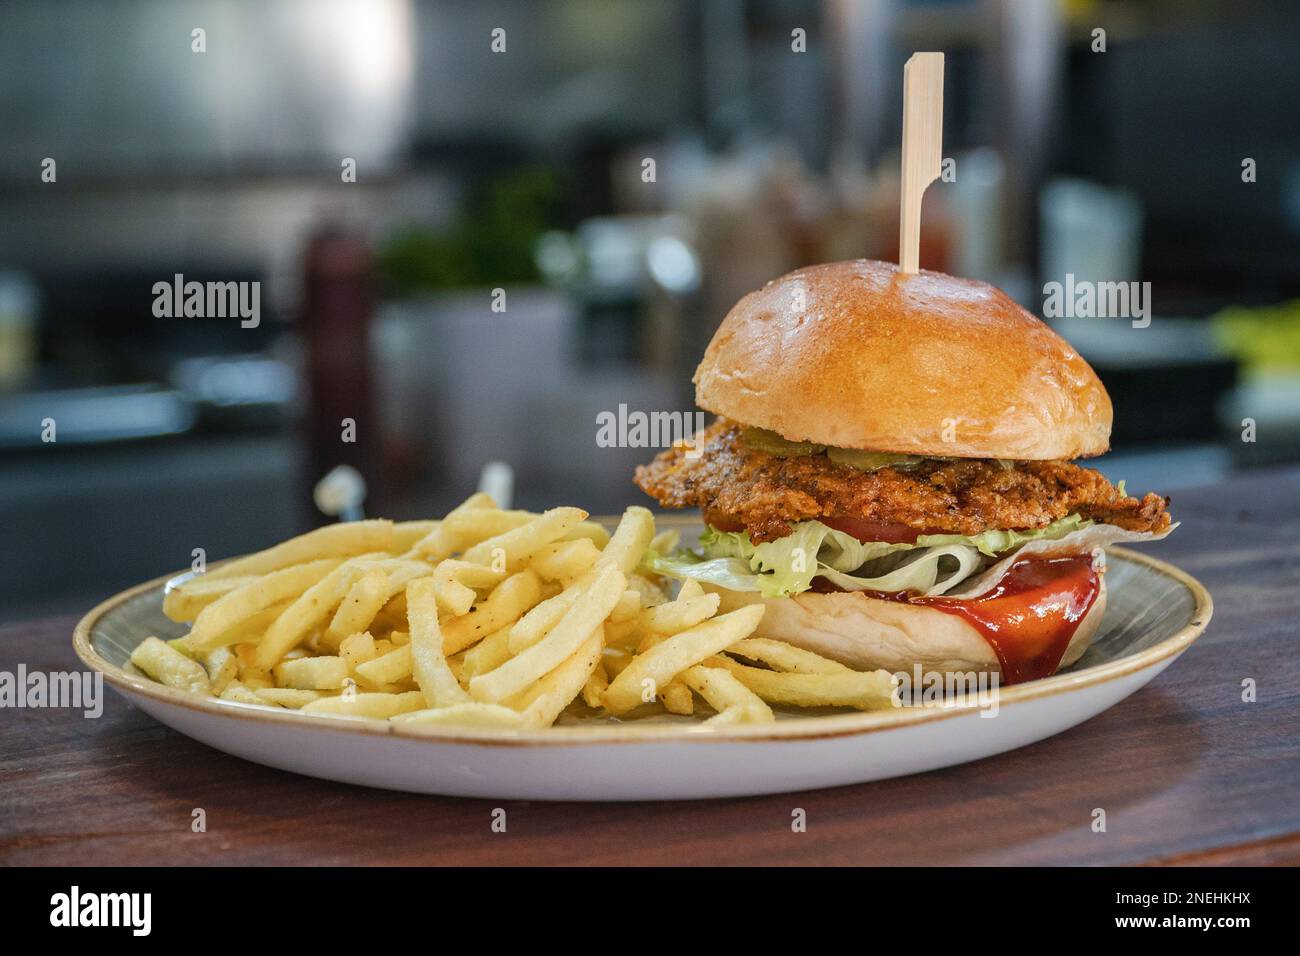 A tasty looking KFC style breaded chicken burger served alongside French Fries Stock Photo